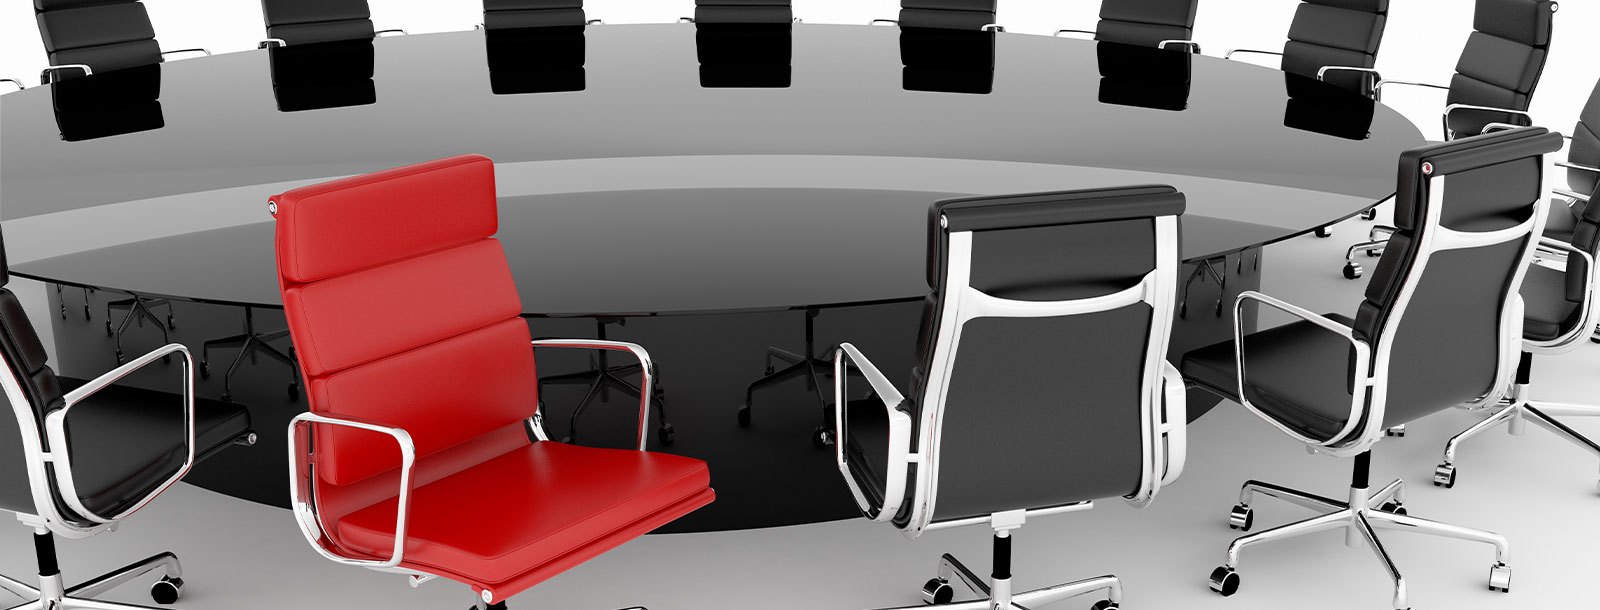 a red office chair surrounded by black office chairs